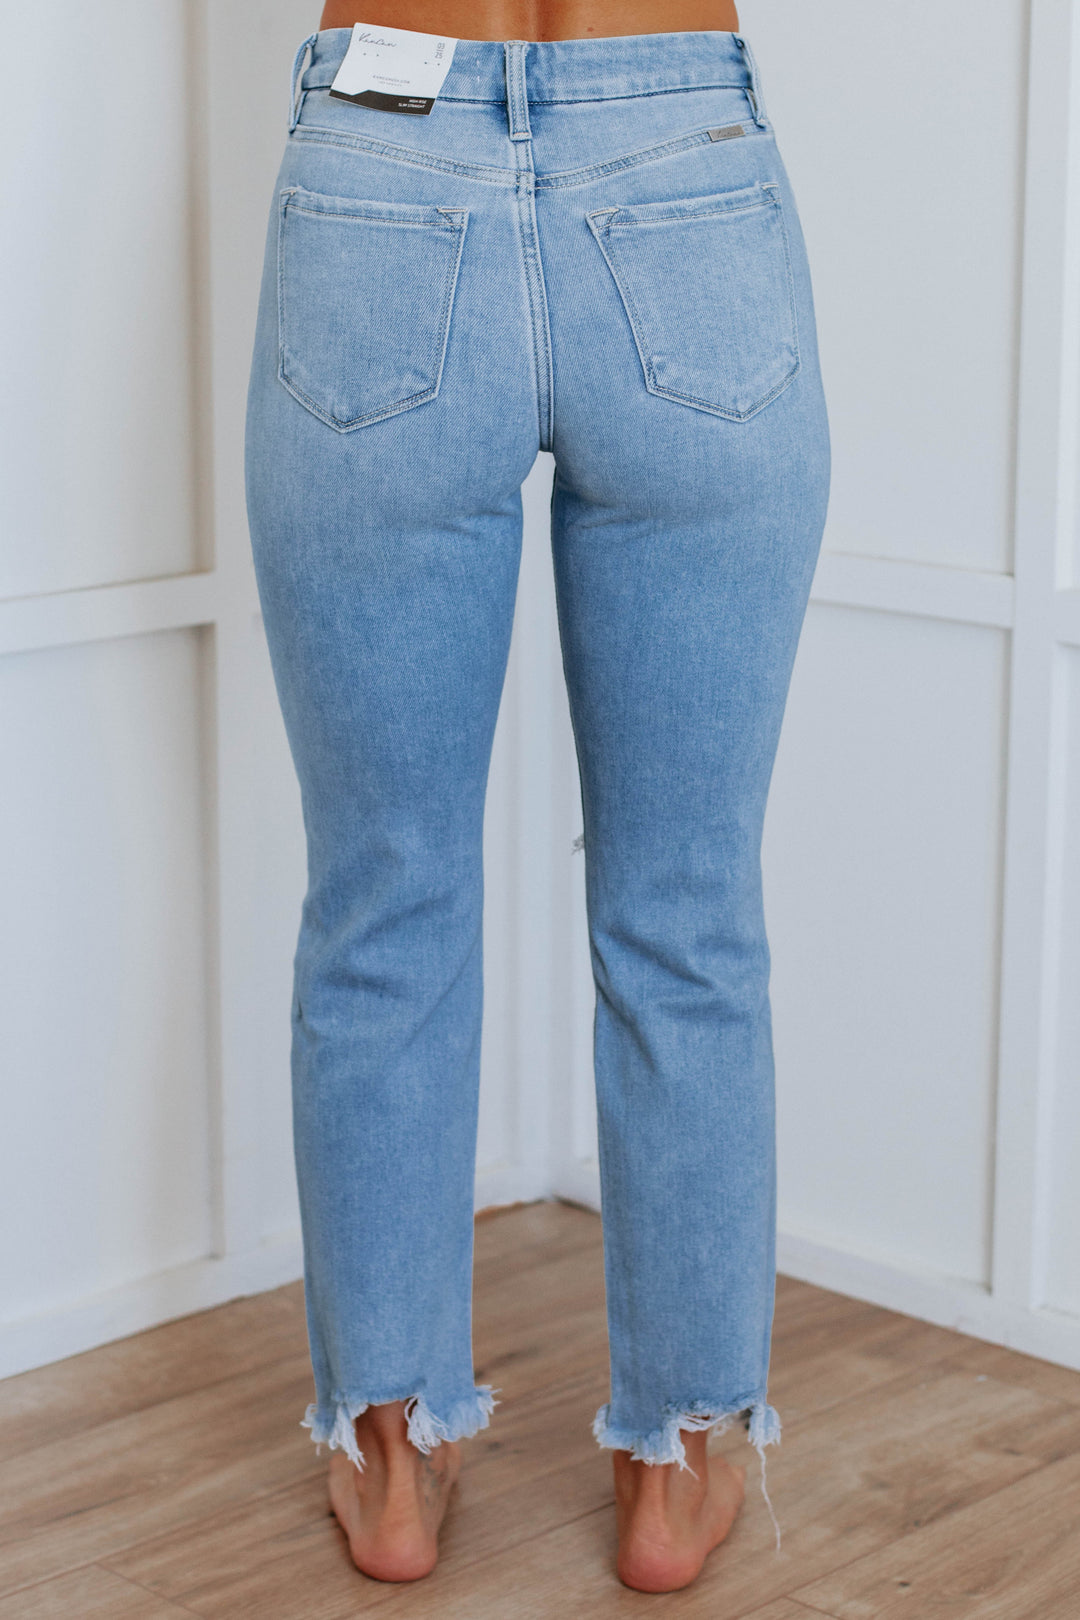 Dolly KanCan Jeans